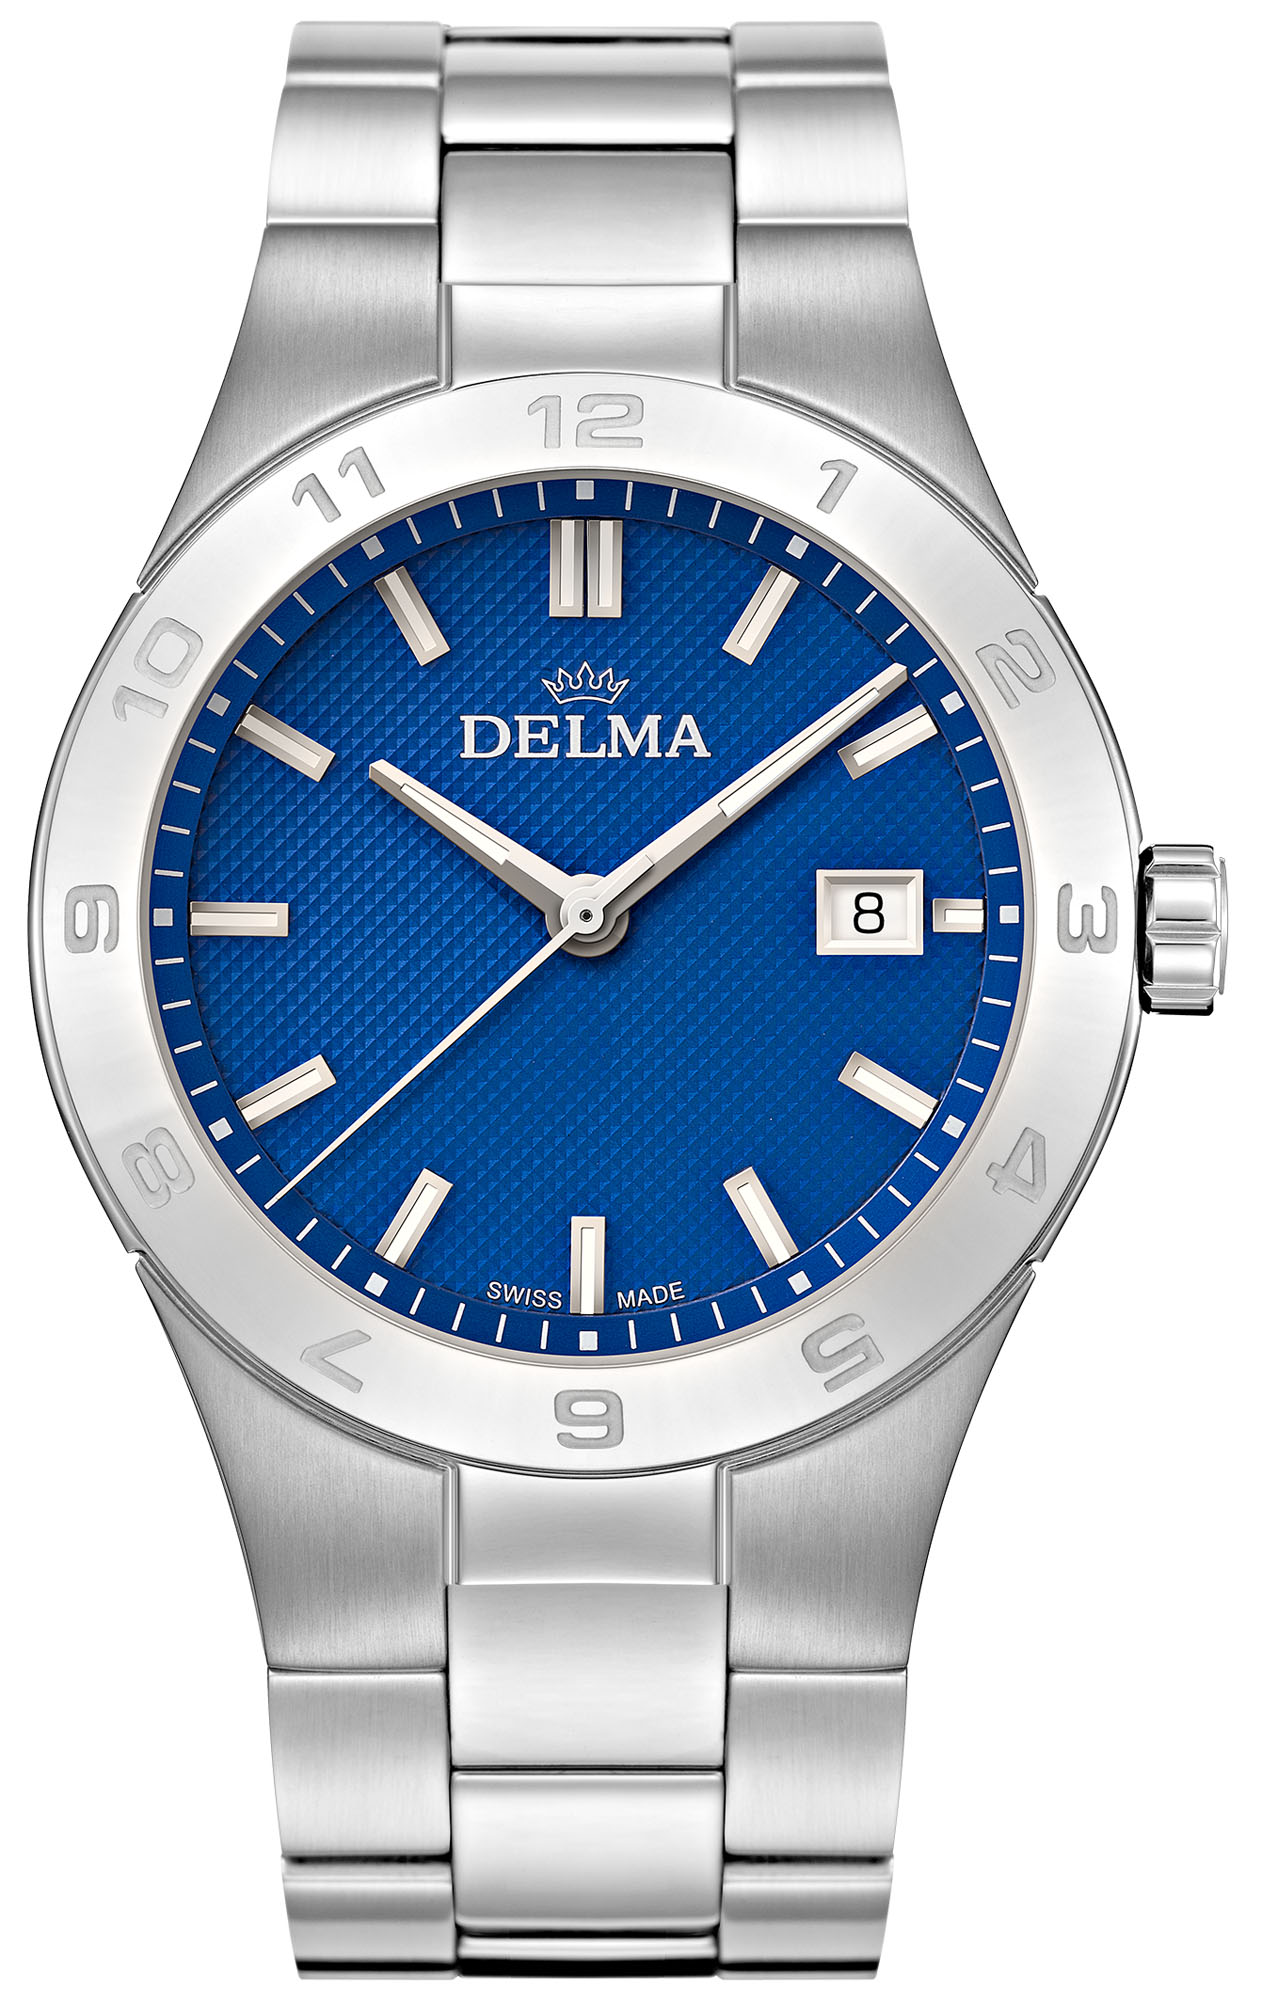 DELMA Rialto Dress Watch in stainless steel with blue dial